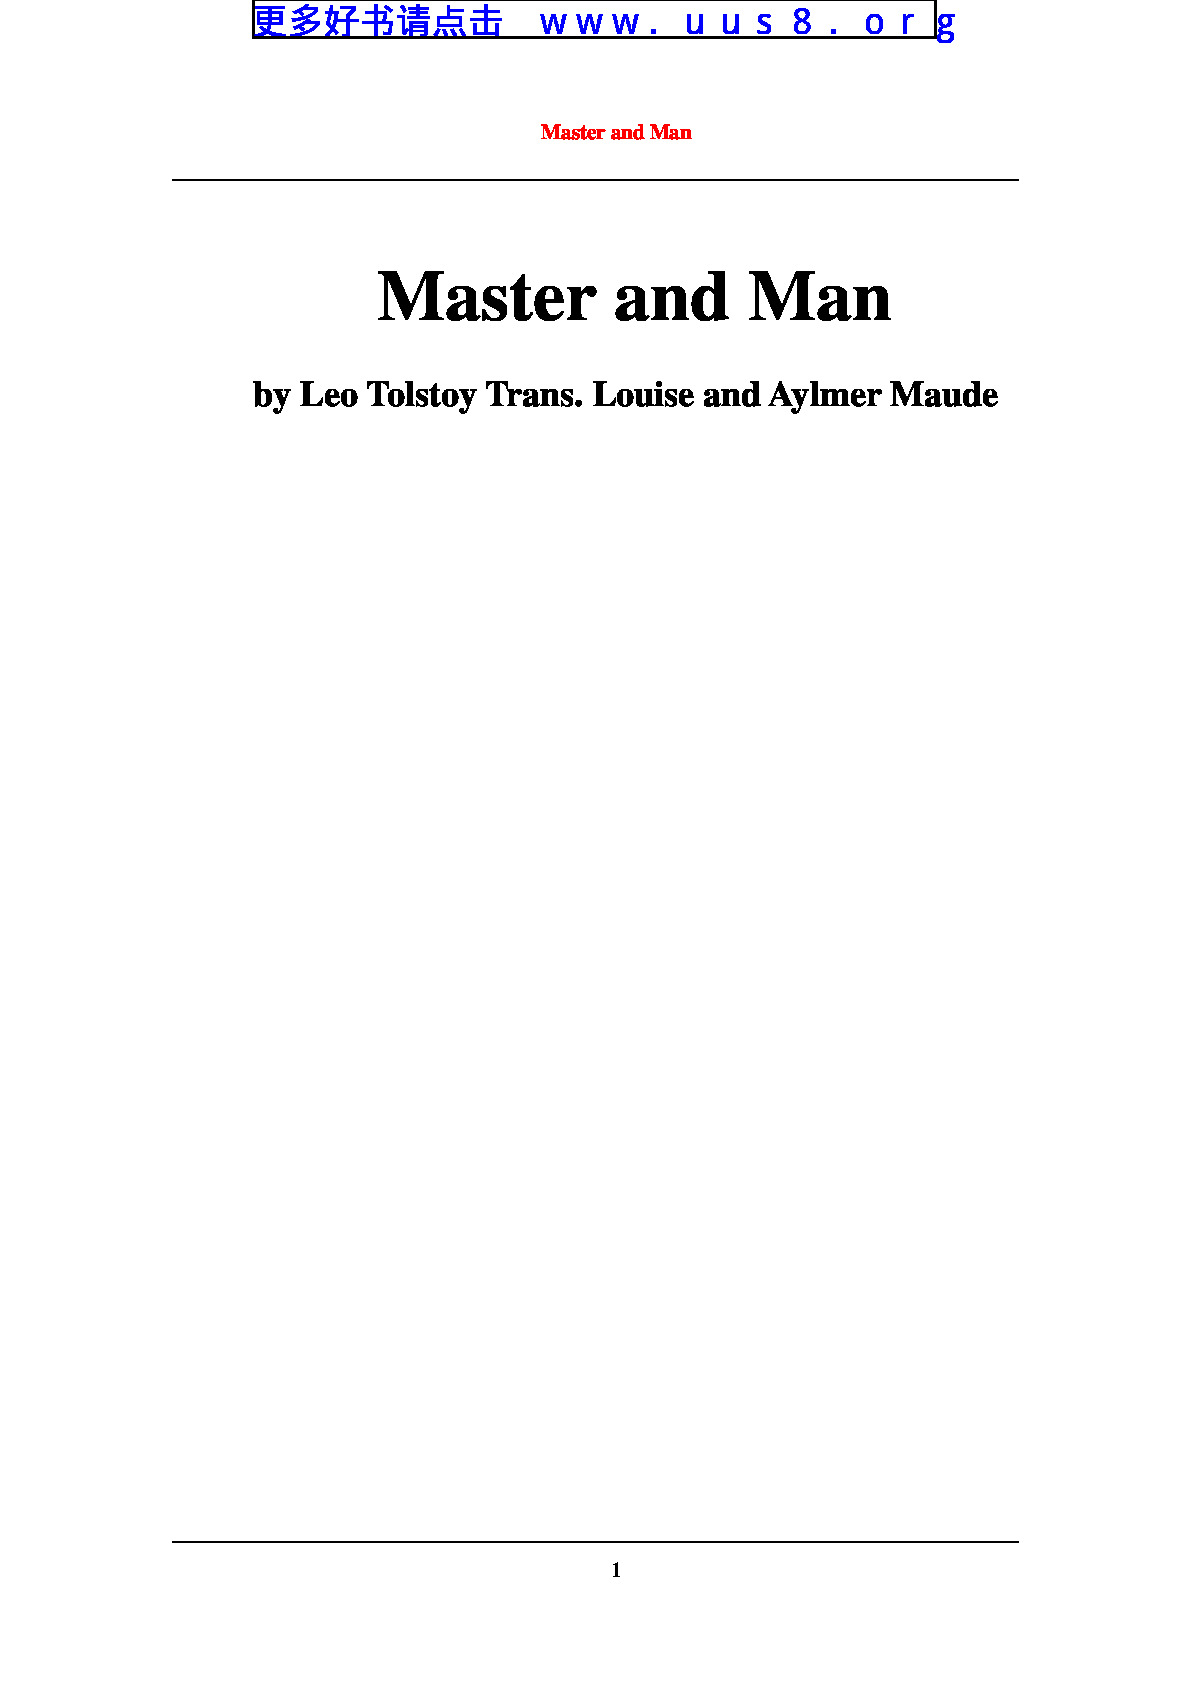 Master_and_Man(主与奴)